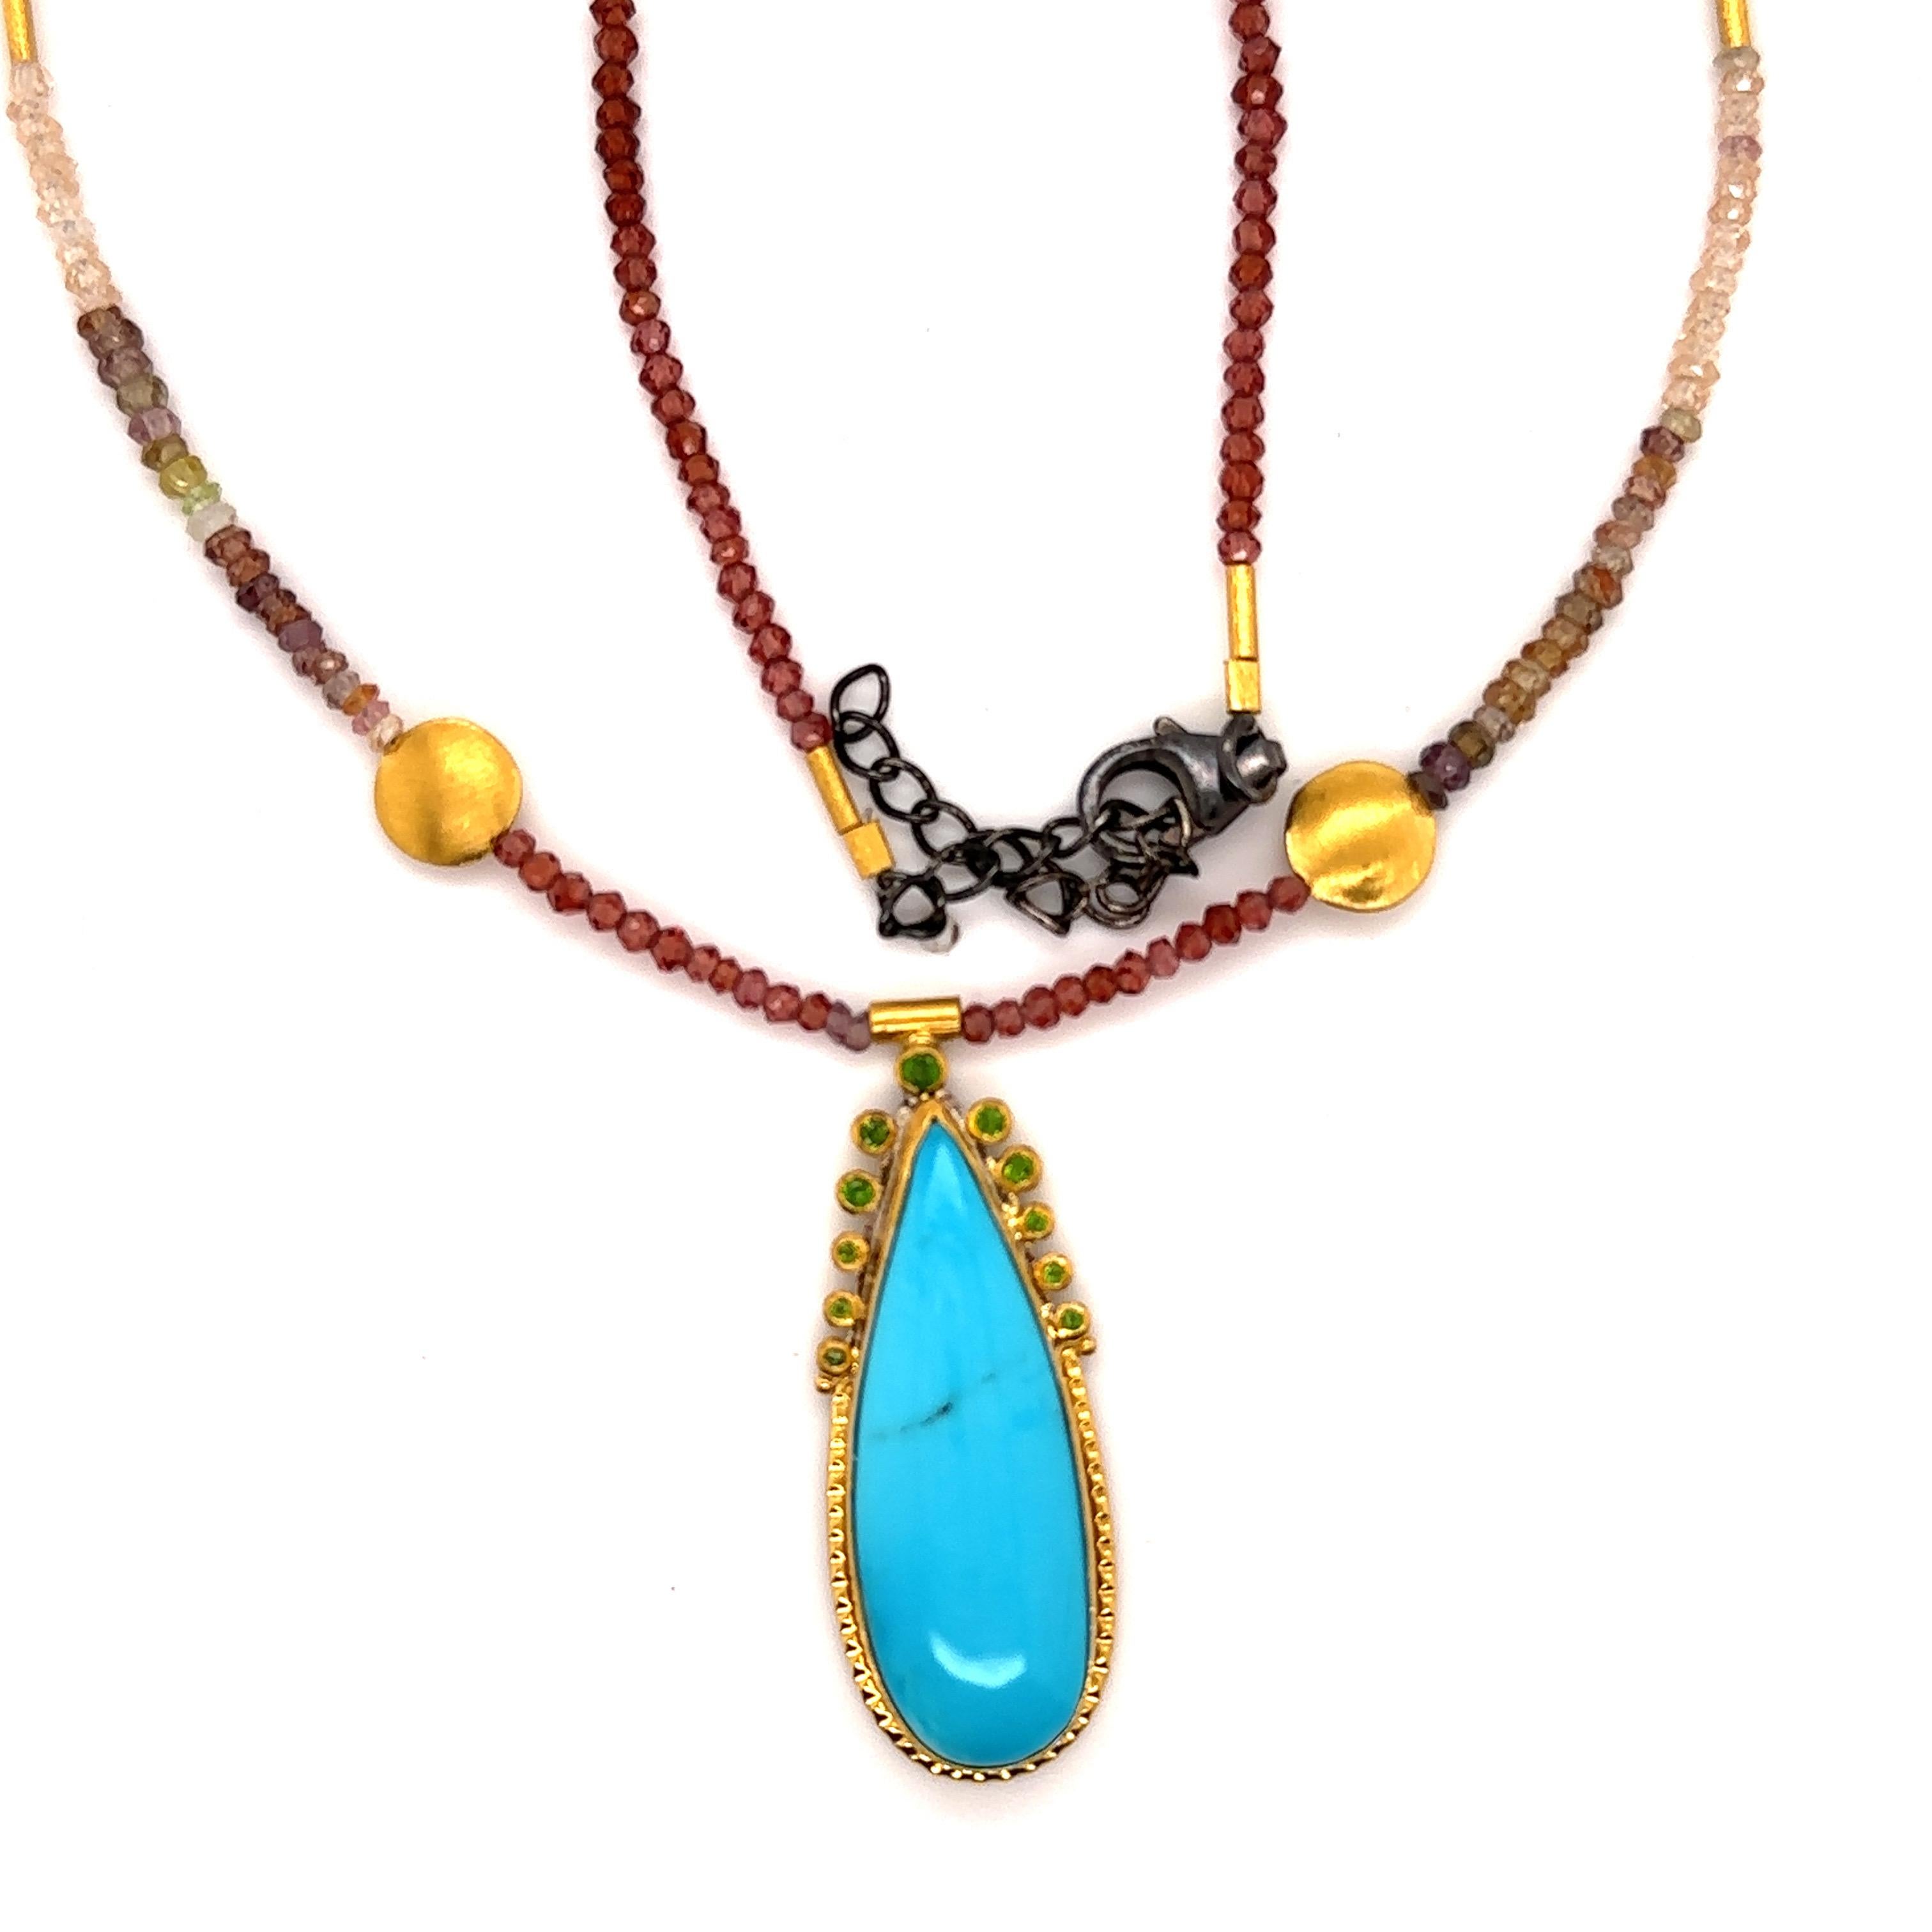 JAS-19-1845 - 24K GOLD/STERLING SILVER w KINGMAN TURQUOISE & MULTI COLOR BEADS For Sale 1